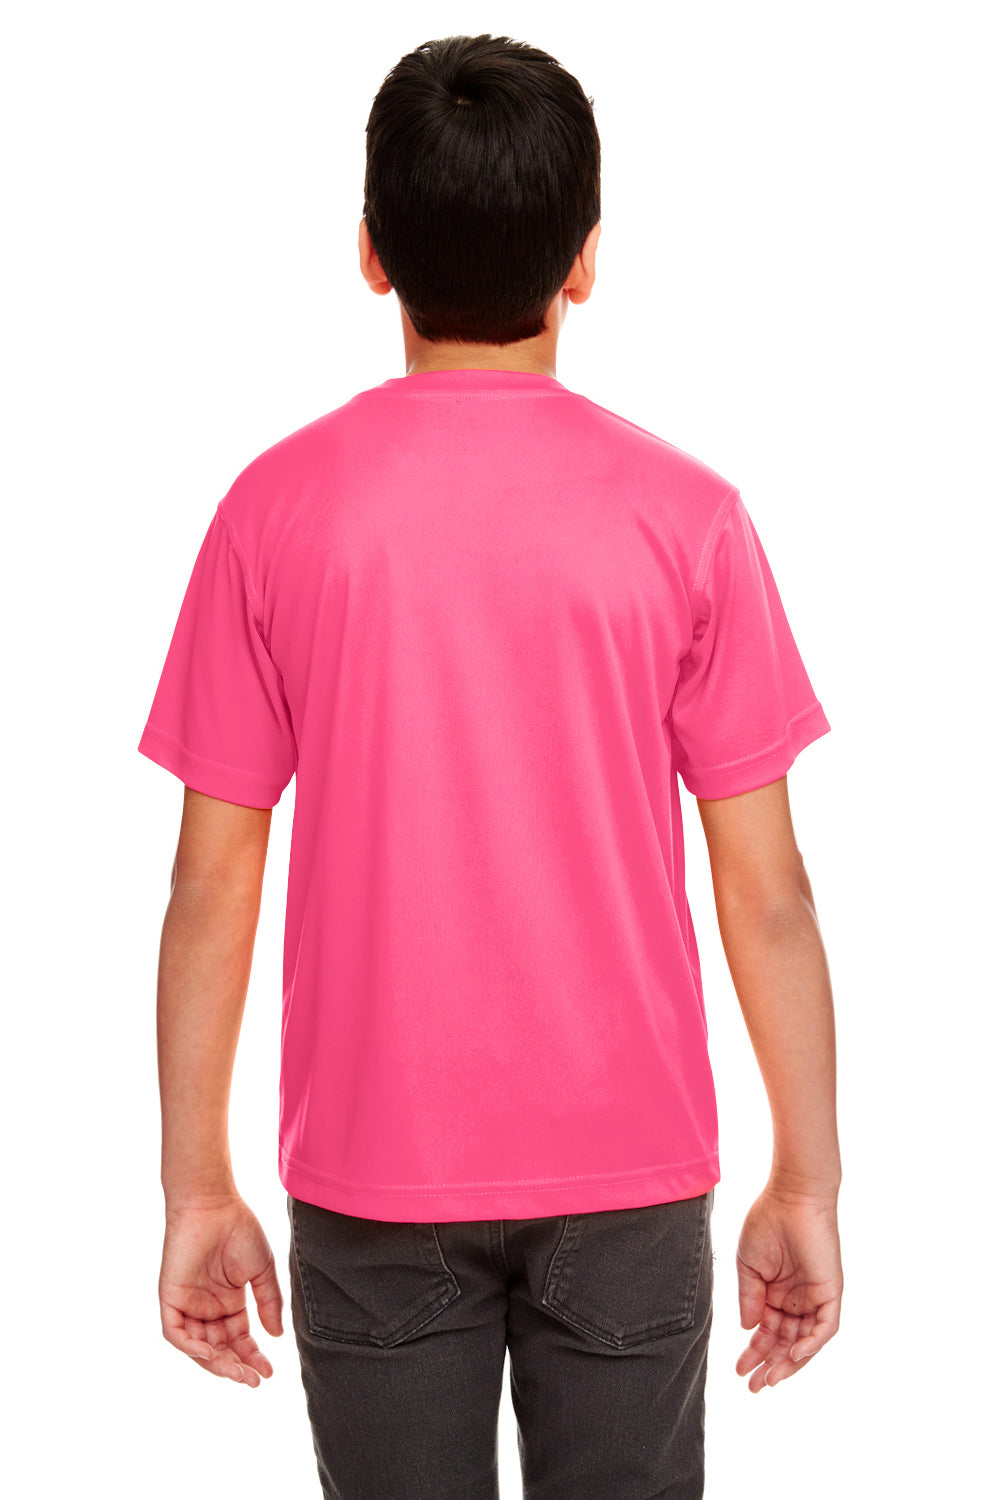 UltraClub 8420Y Youth Cool & Dry Performance Moisture Wicking Short Sleeve Crewneck T-Shirt Heliconia Pink Back